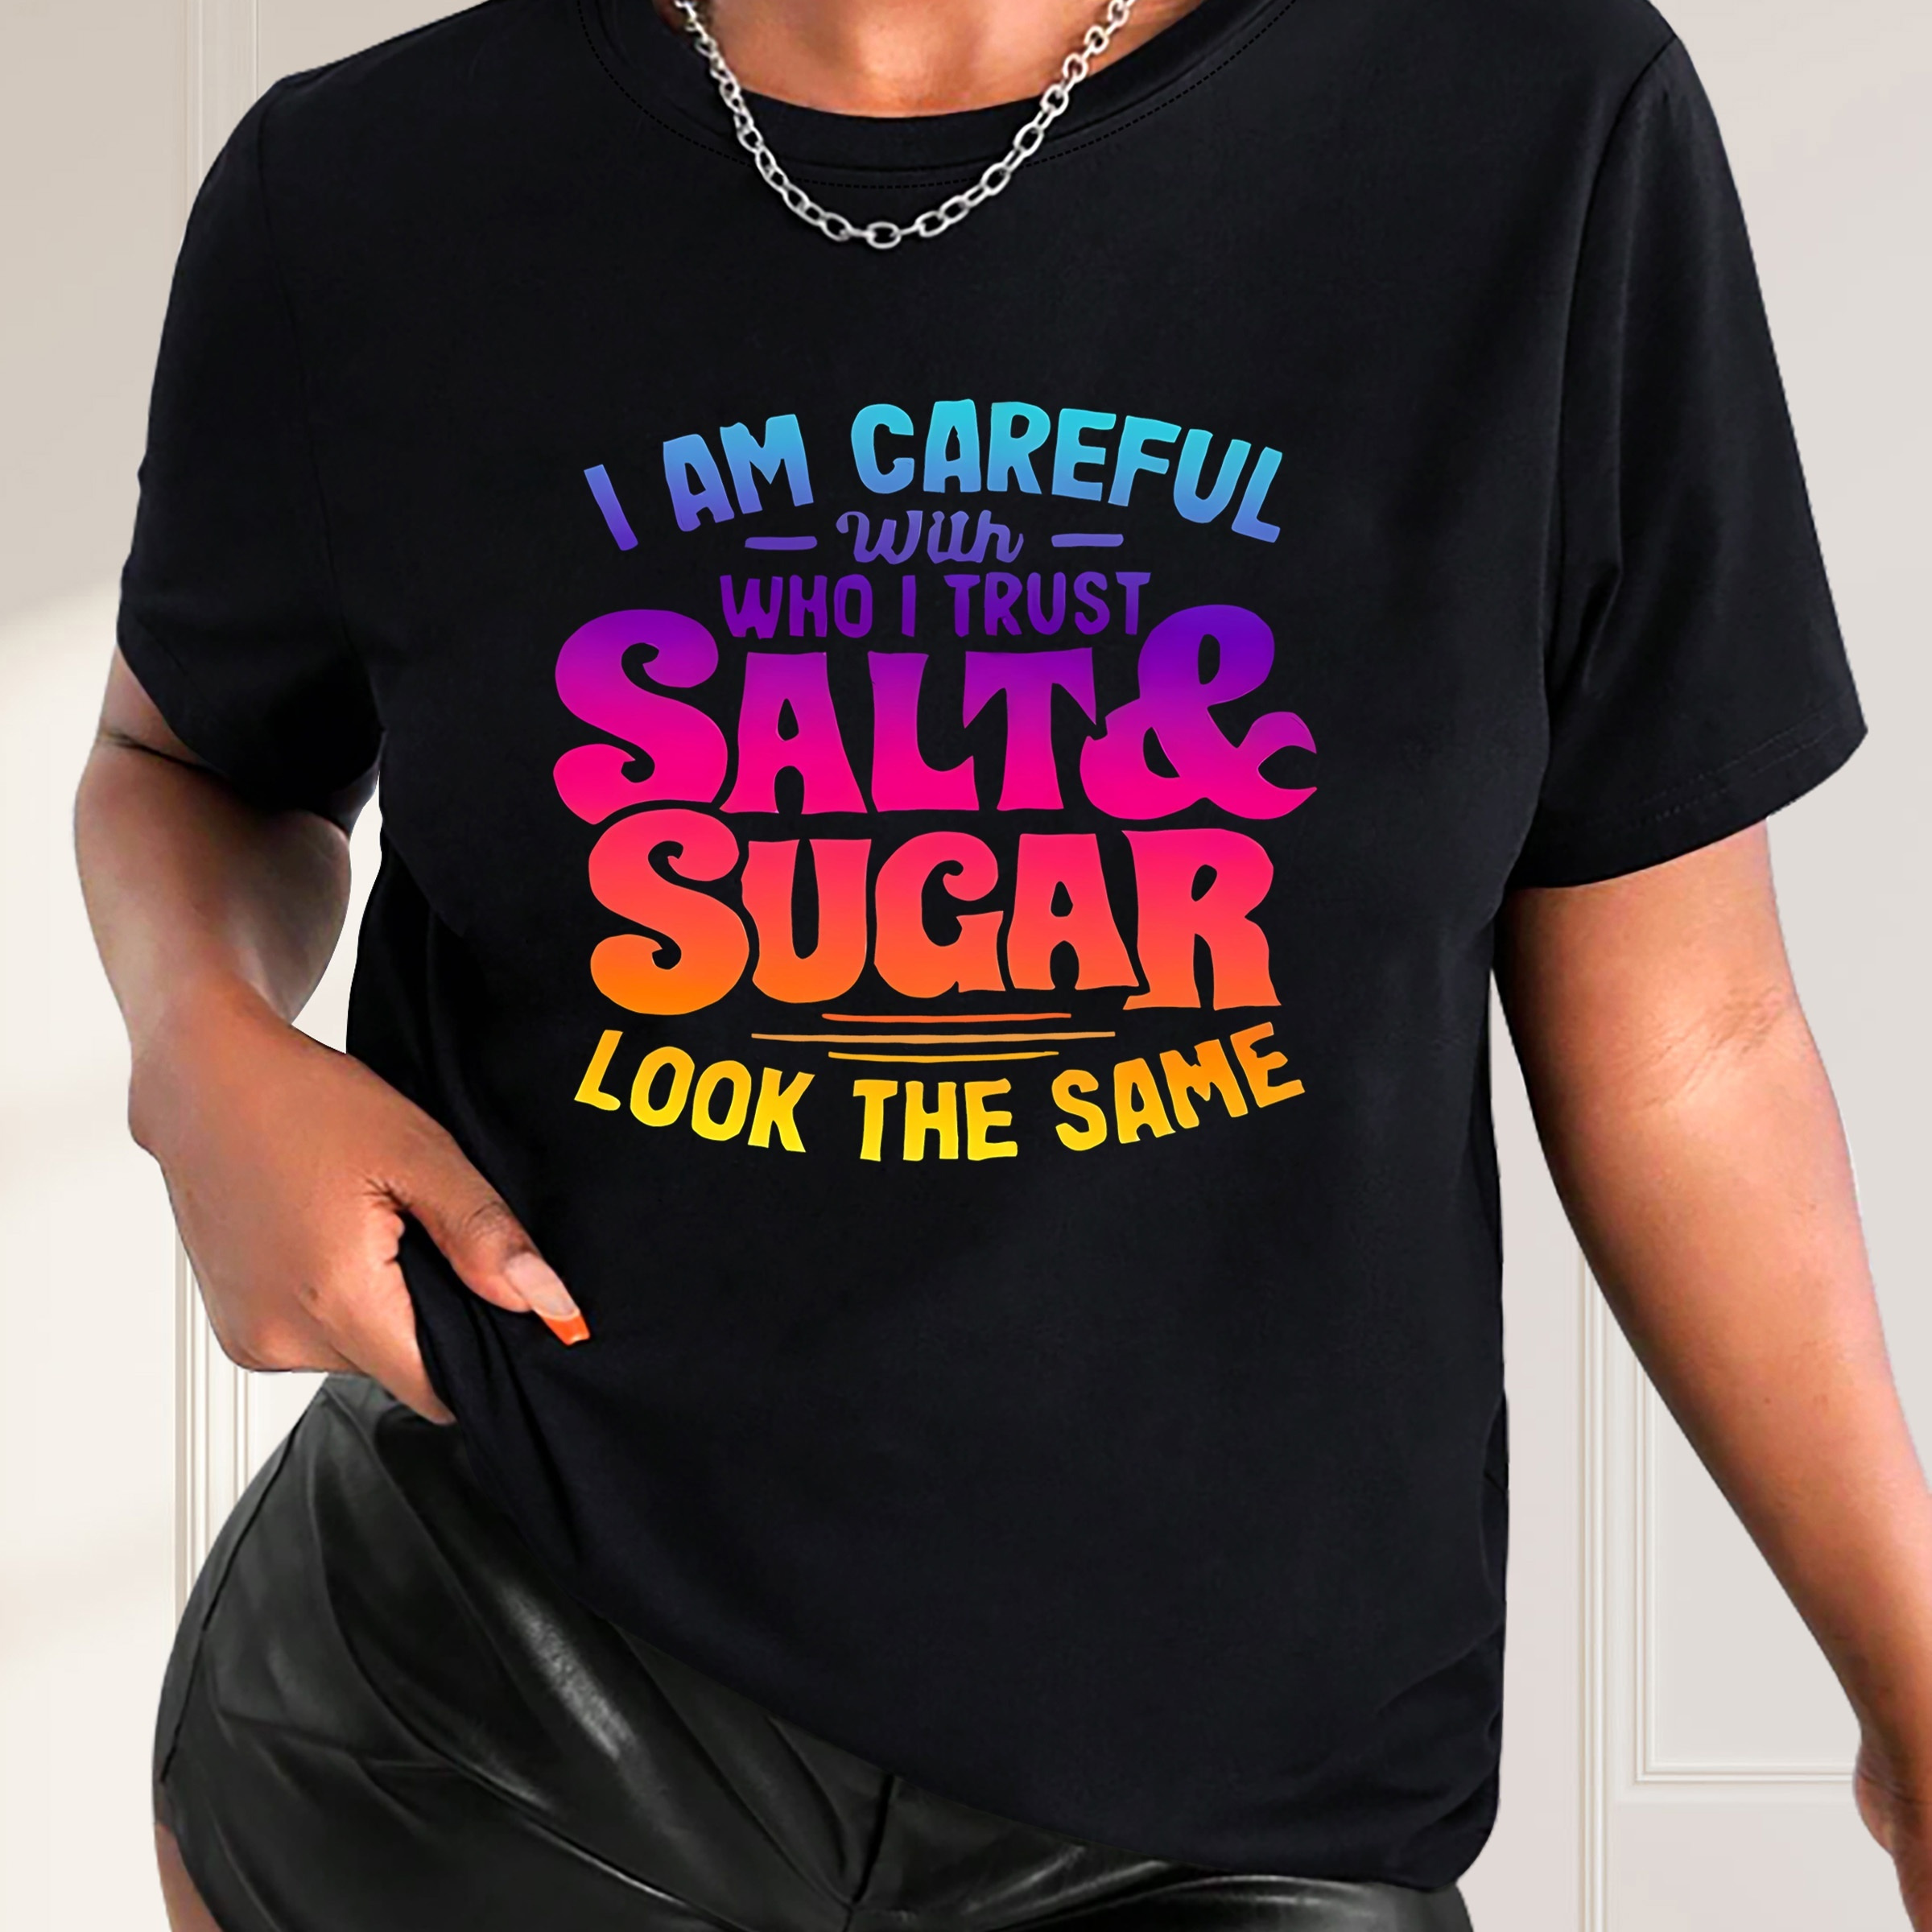 

Women's Casual Short Sleeve T-shirt, Round Neck, With Colorful Gradient Lettering, "i Am Careful Who I Trust - Salt & Sugar Look The Same" Graphic Tee, Fashion Top